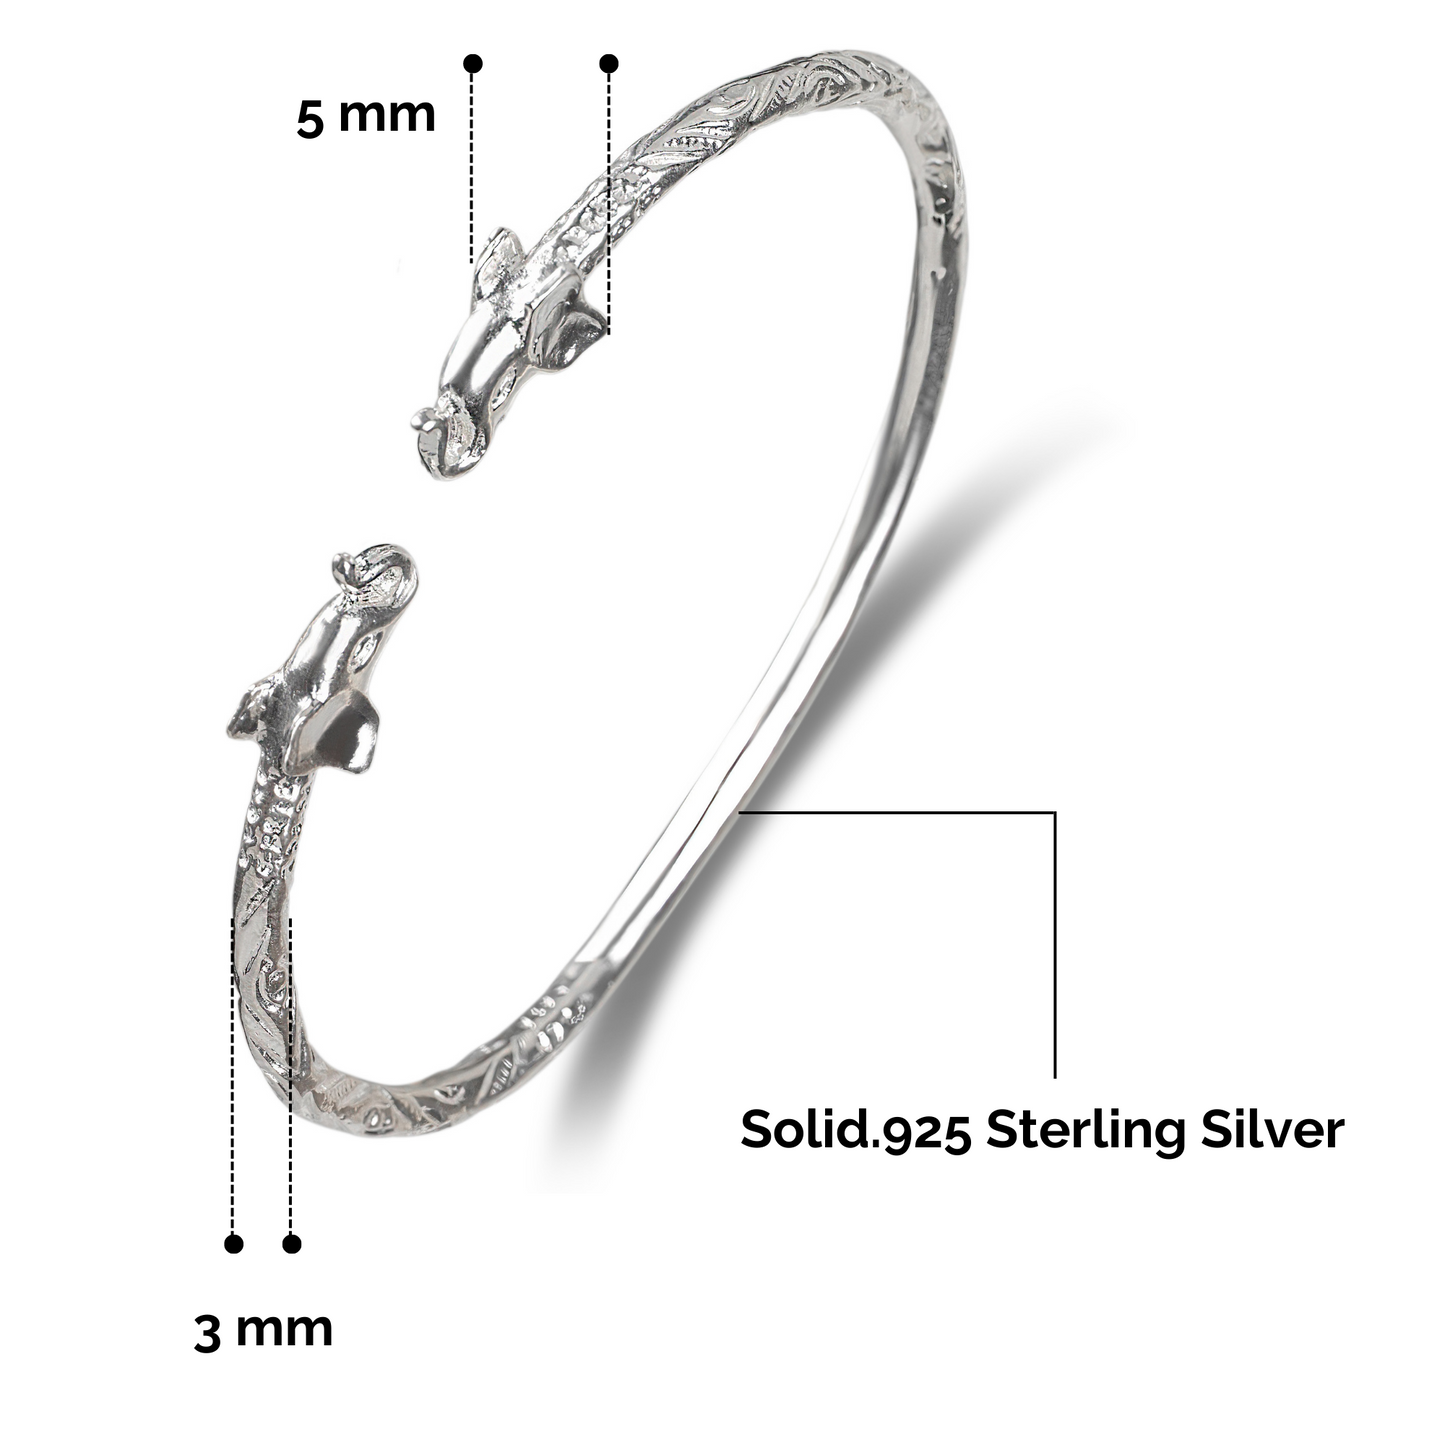 Better Jewelry Elephant .925 Sterling Silver West Indian Bangles (Pair)